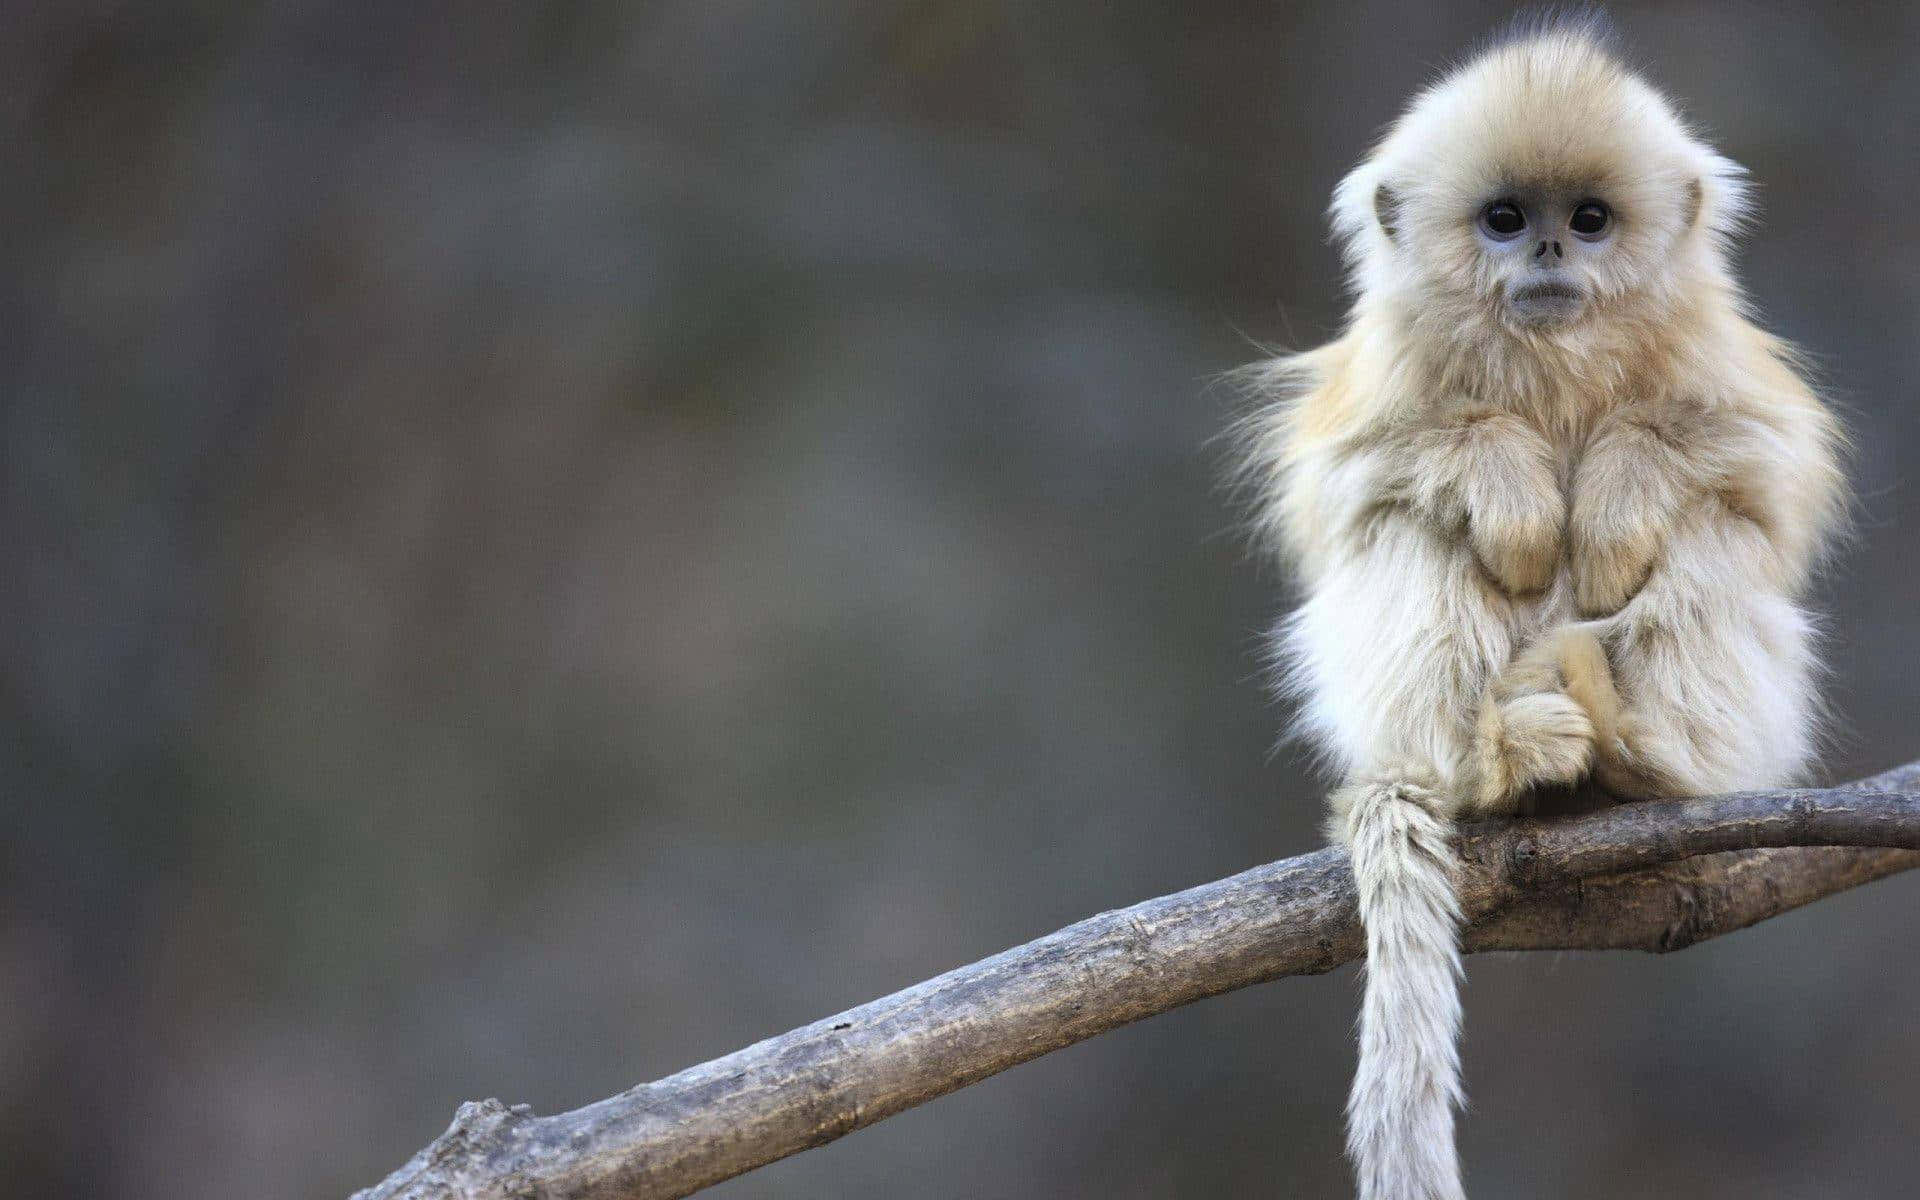 This Adorable Monkey is Ready for a Cuddle